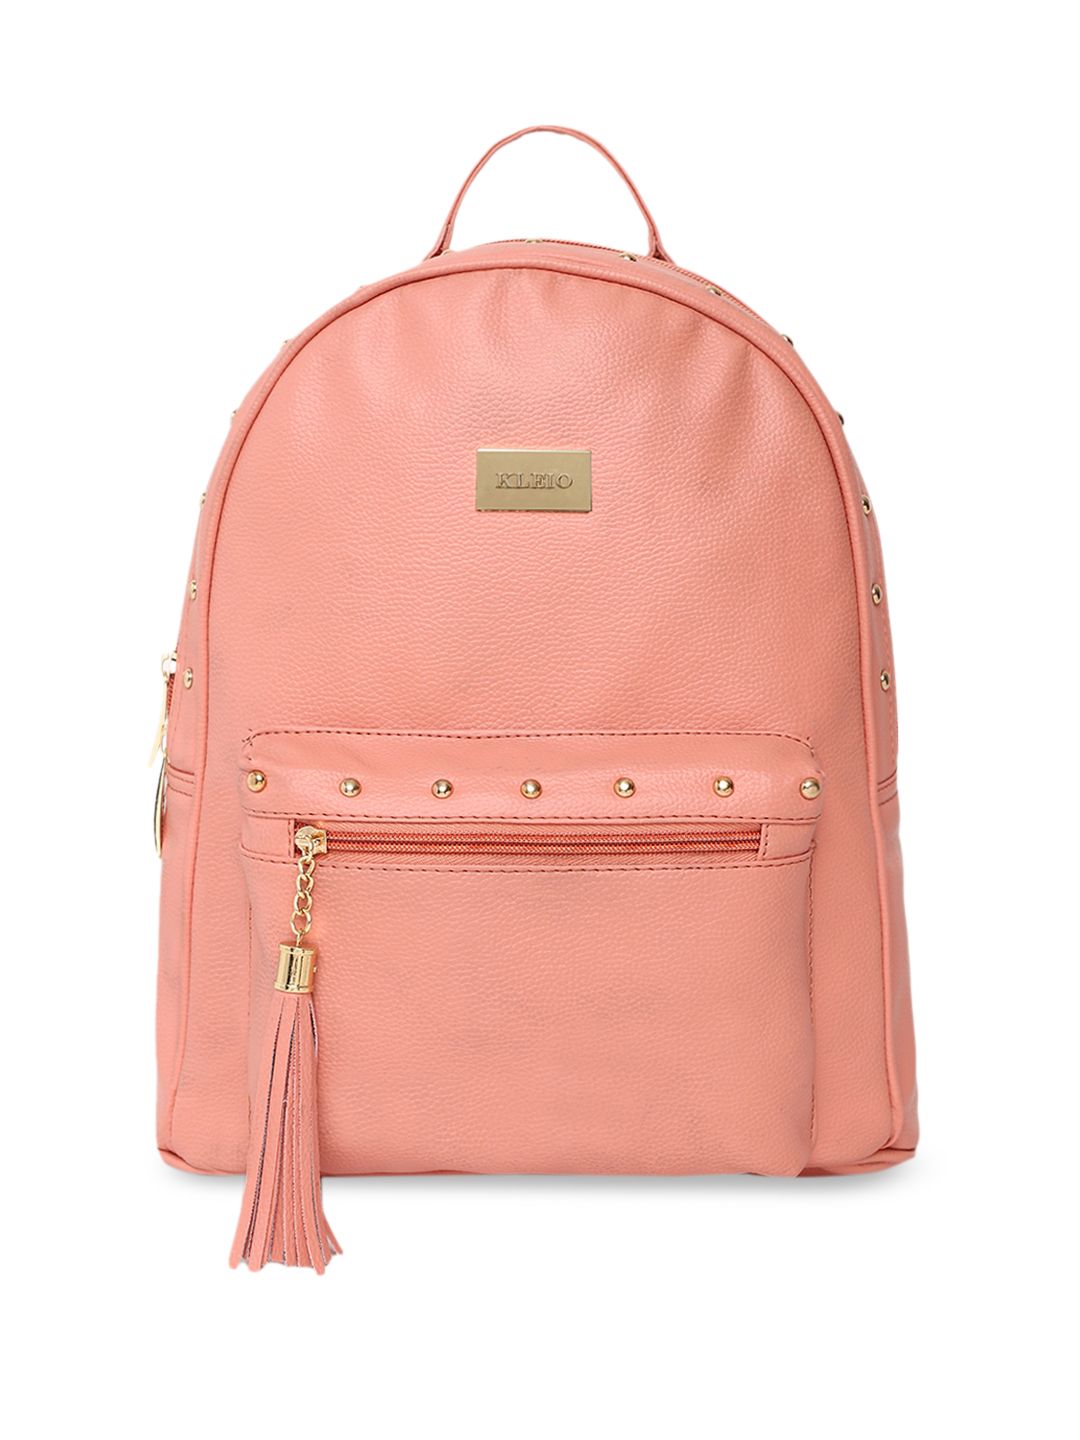 KLEIO Women Peach-Coloured Solid Backpack Price in India